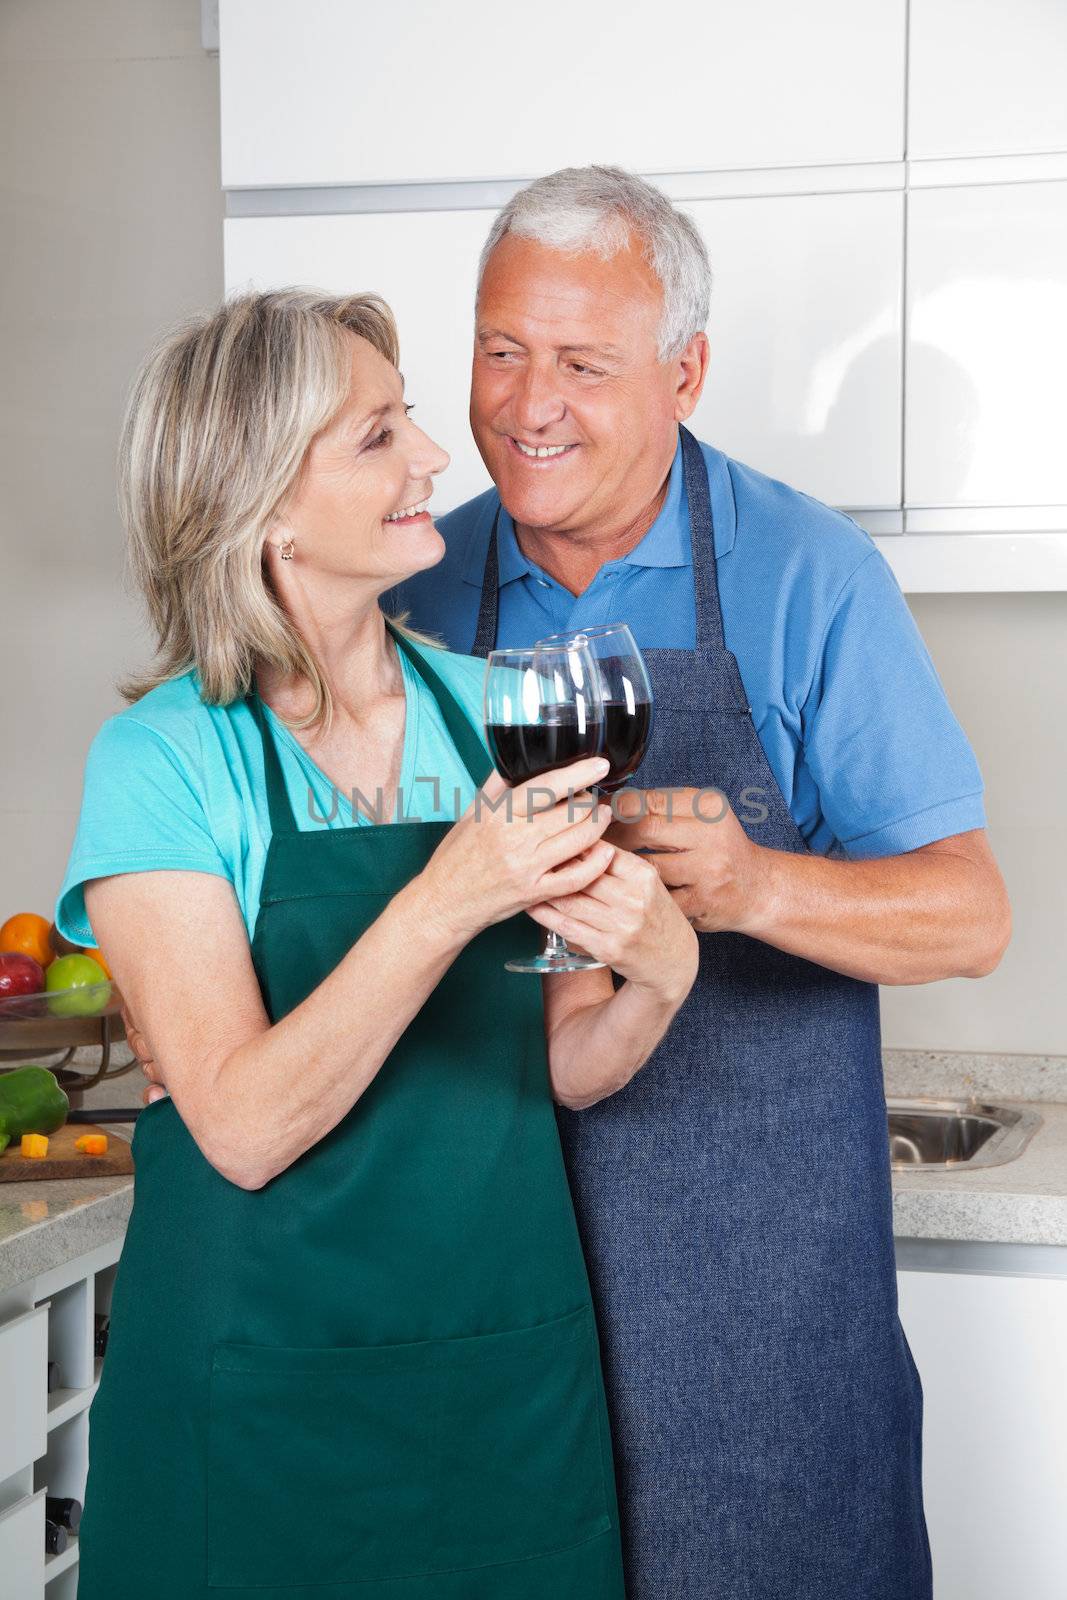 Couple with Wine Glasses by leaf